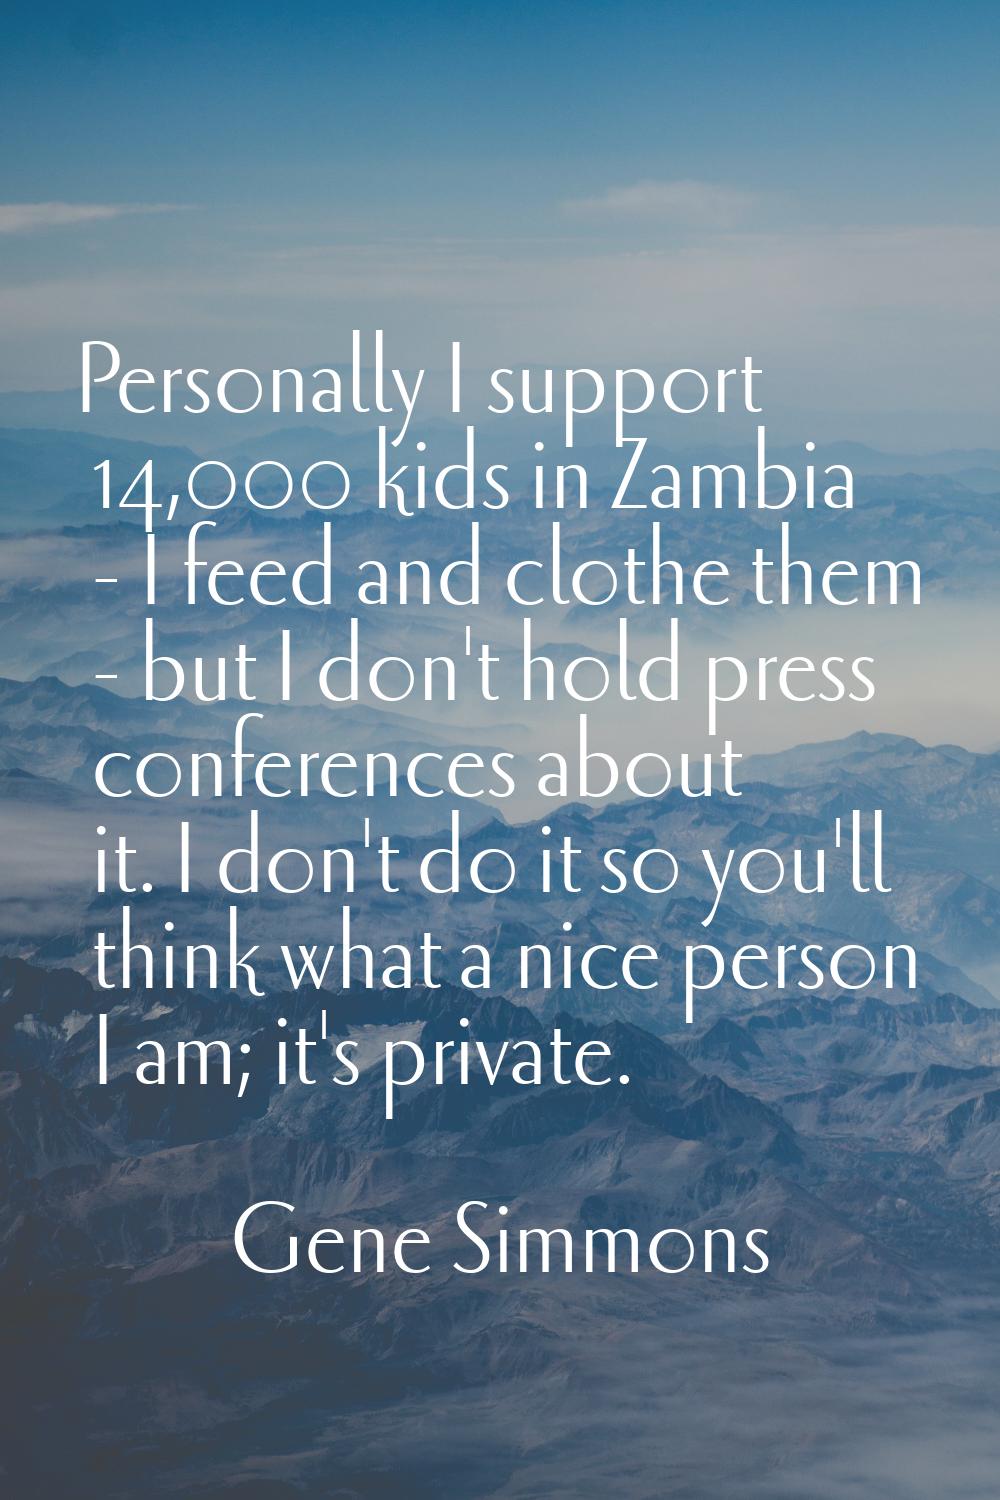 Personally I support 14,000 kids in Zambia - I feed and clothe them - but I don't hold press confer